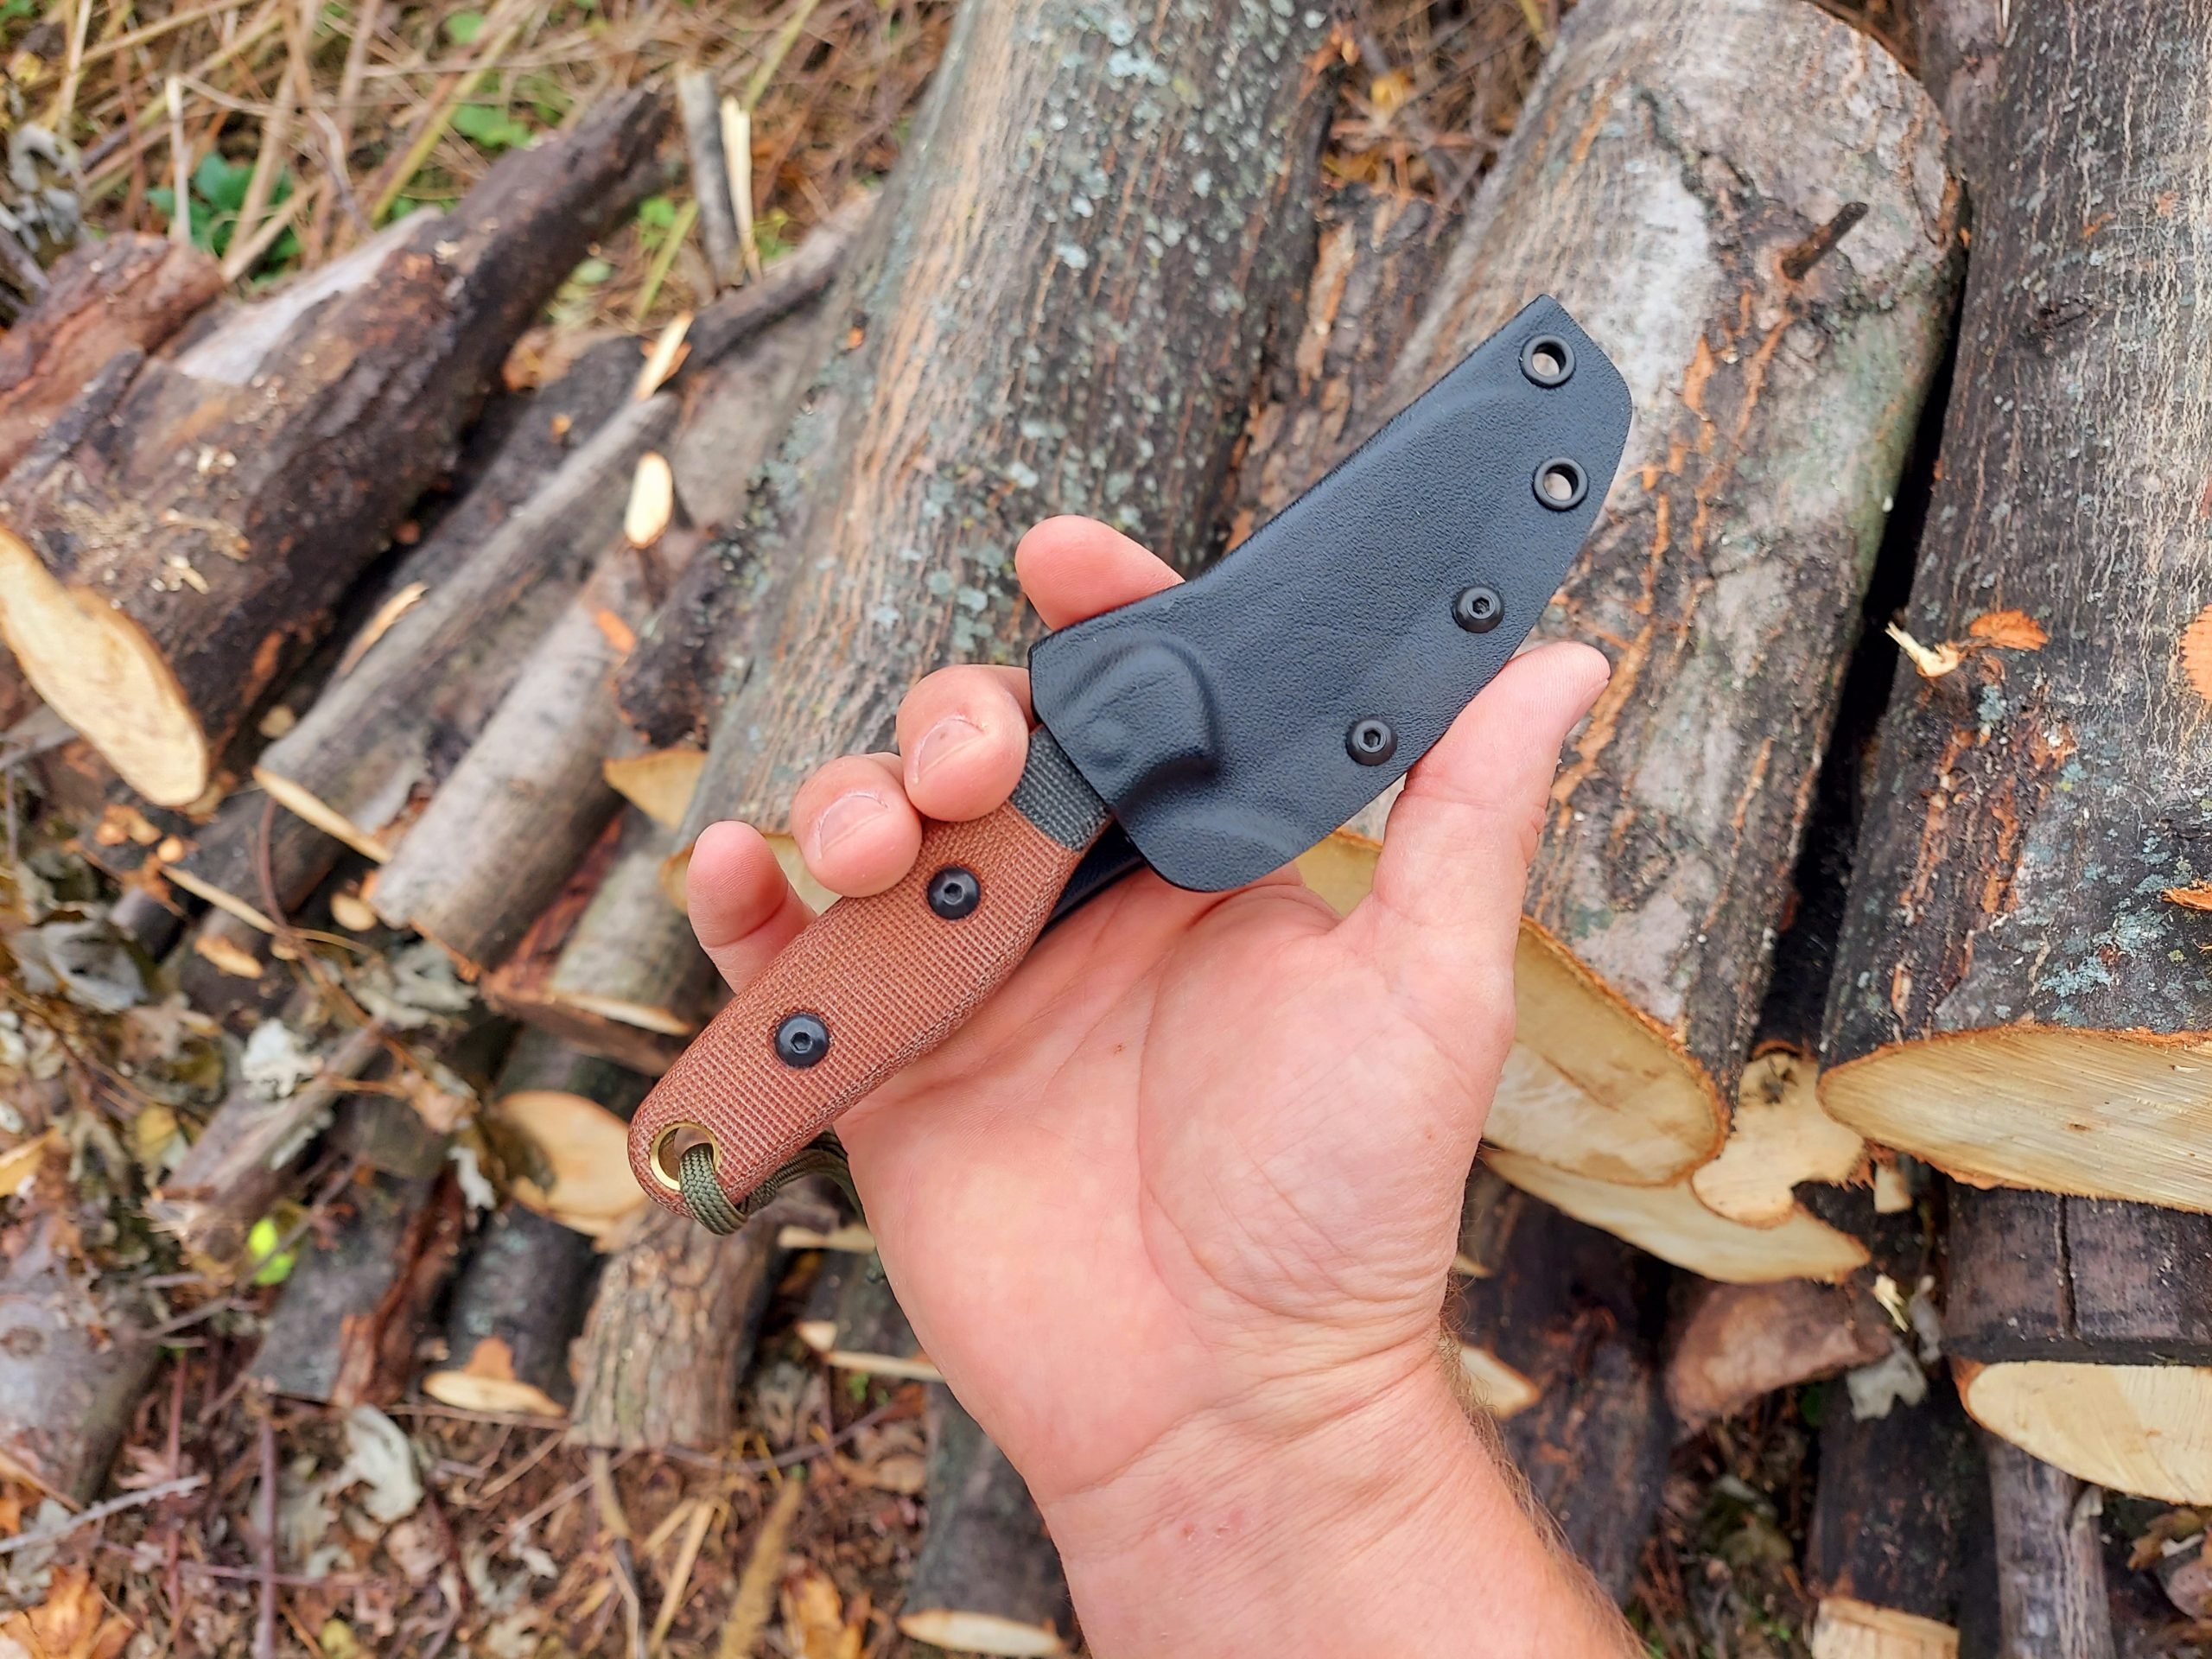 The Hornero comes with a very well thought out sheath that is just as durable as the knife itself. Together, they form a small, light package.